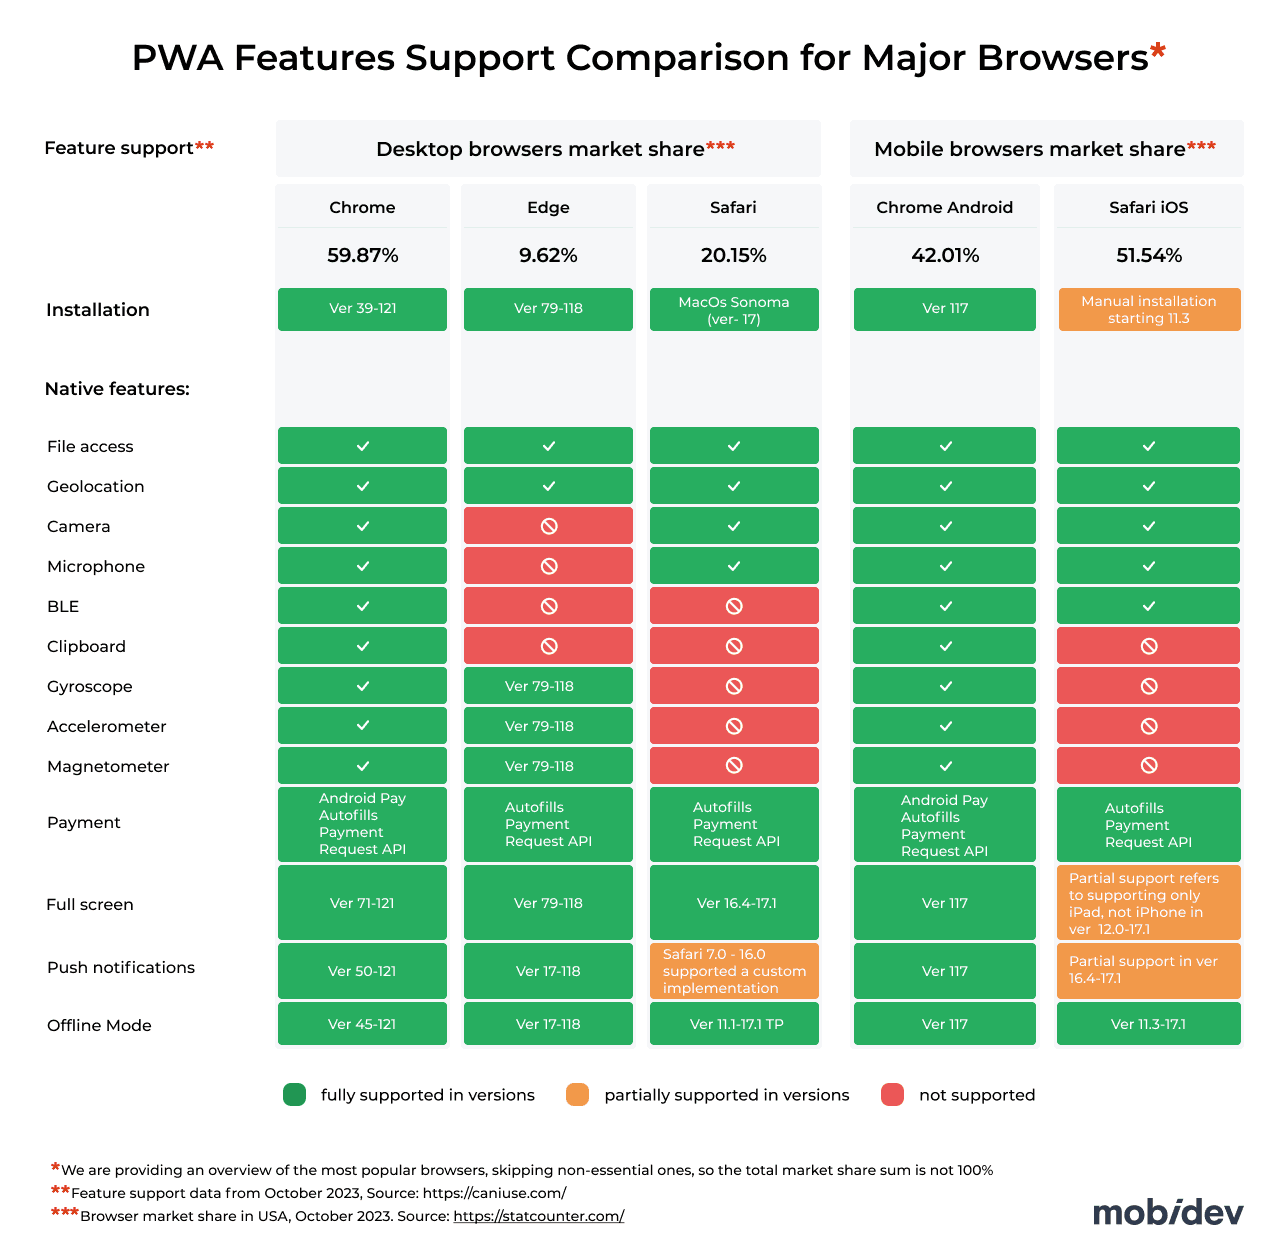 PWA Features Support Comparison for Different Browsers